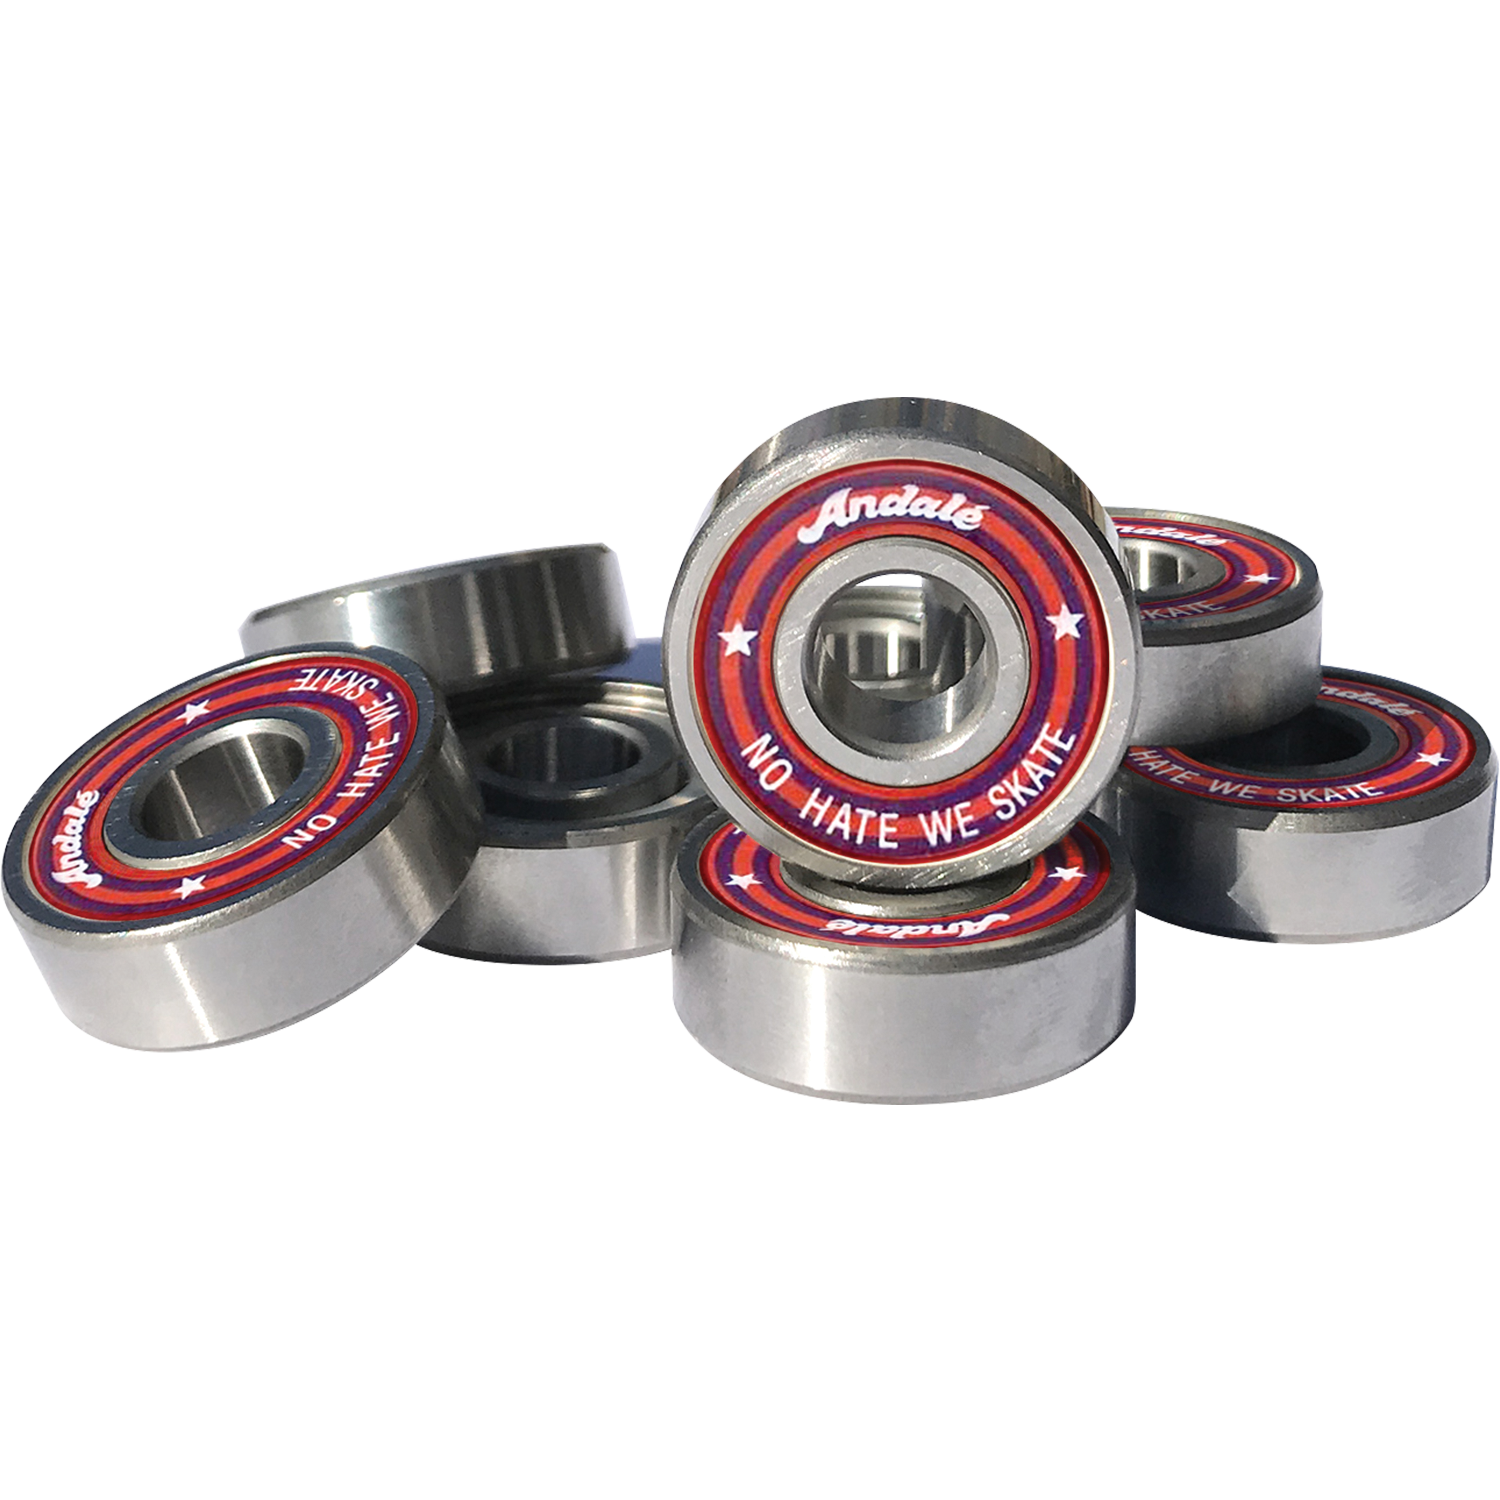 Andale No Hate We Skate Bearings White Single Set - 8 Pieces